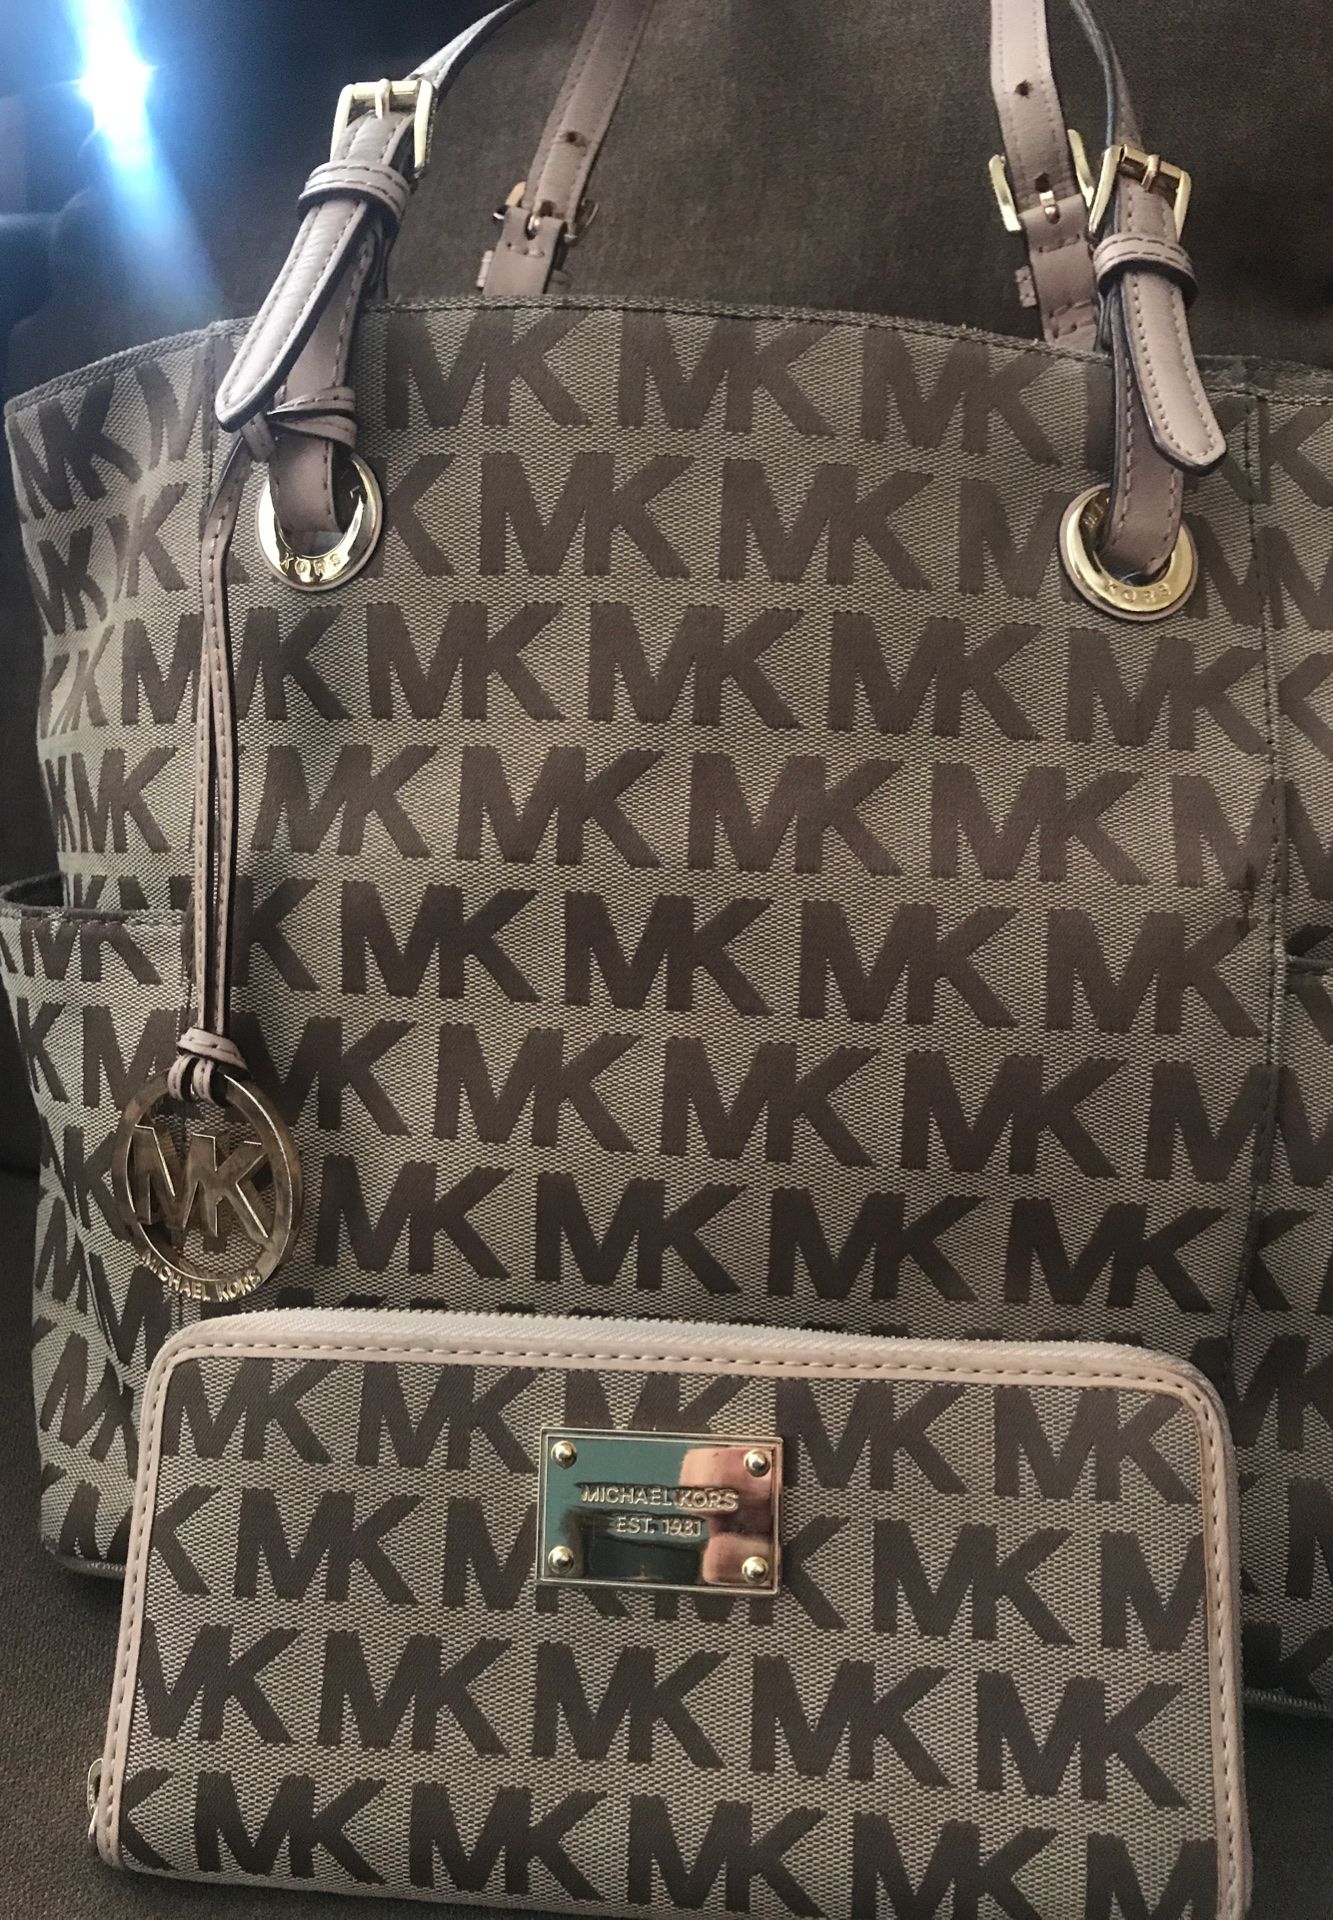 Michael Kors purse and wallet $75